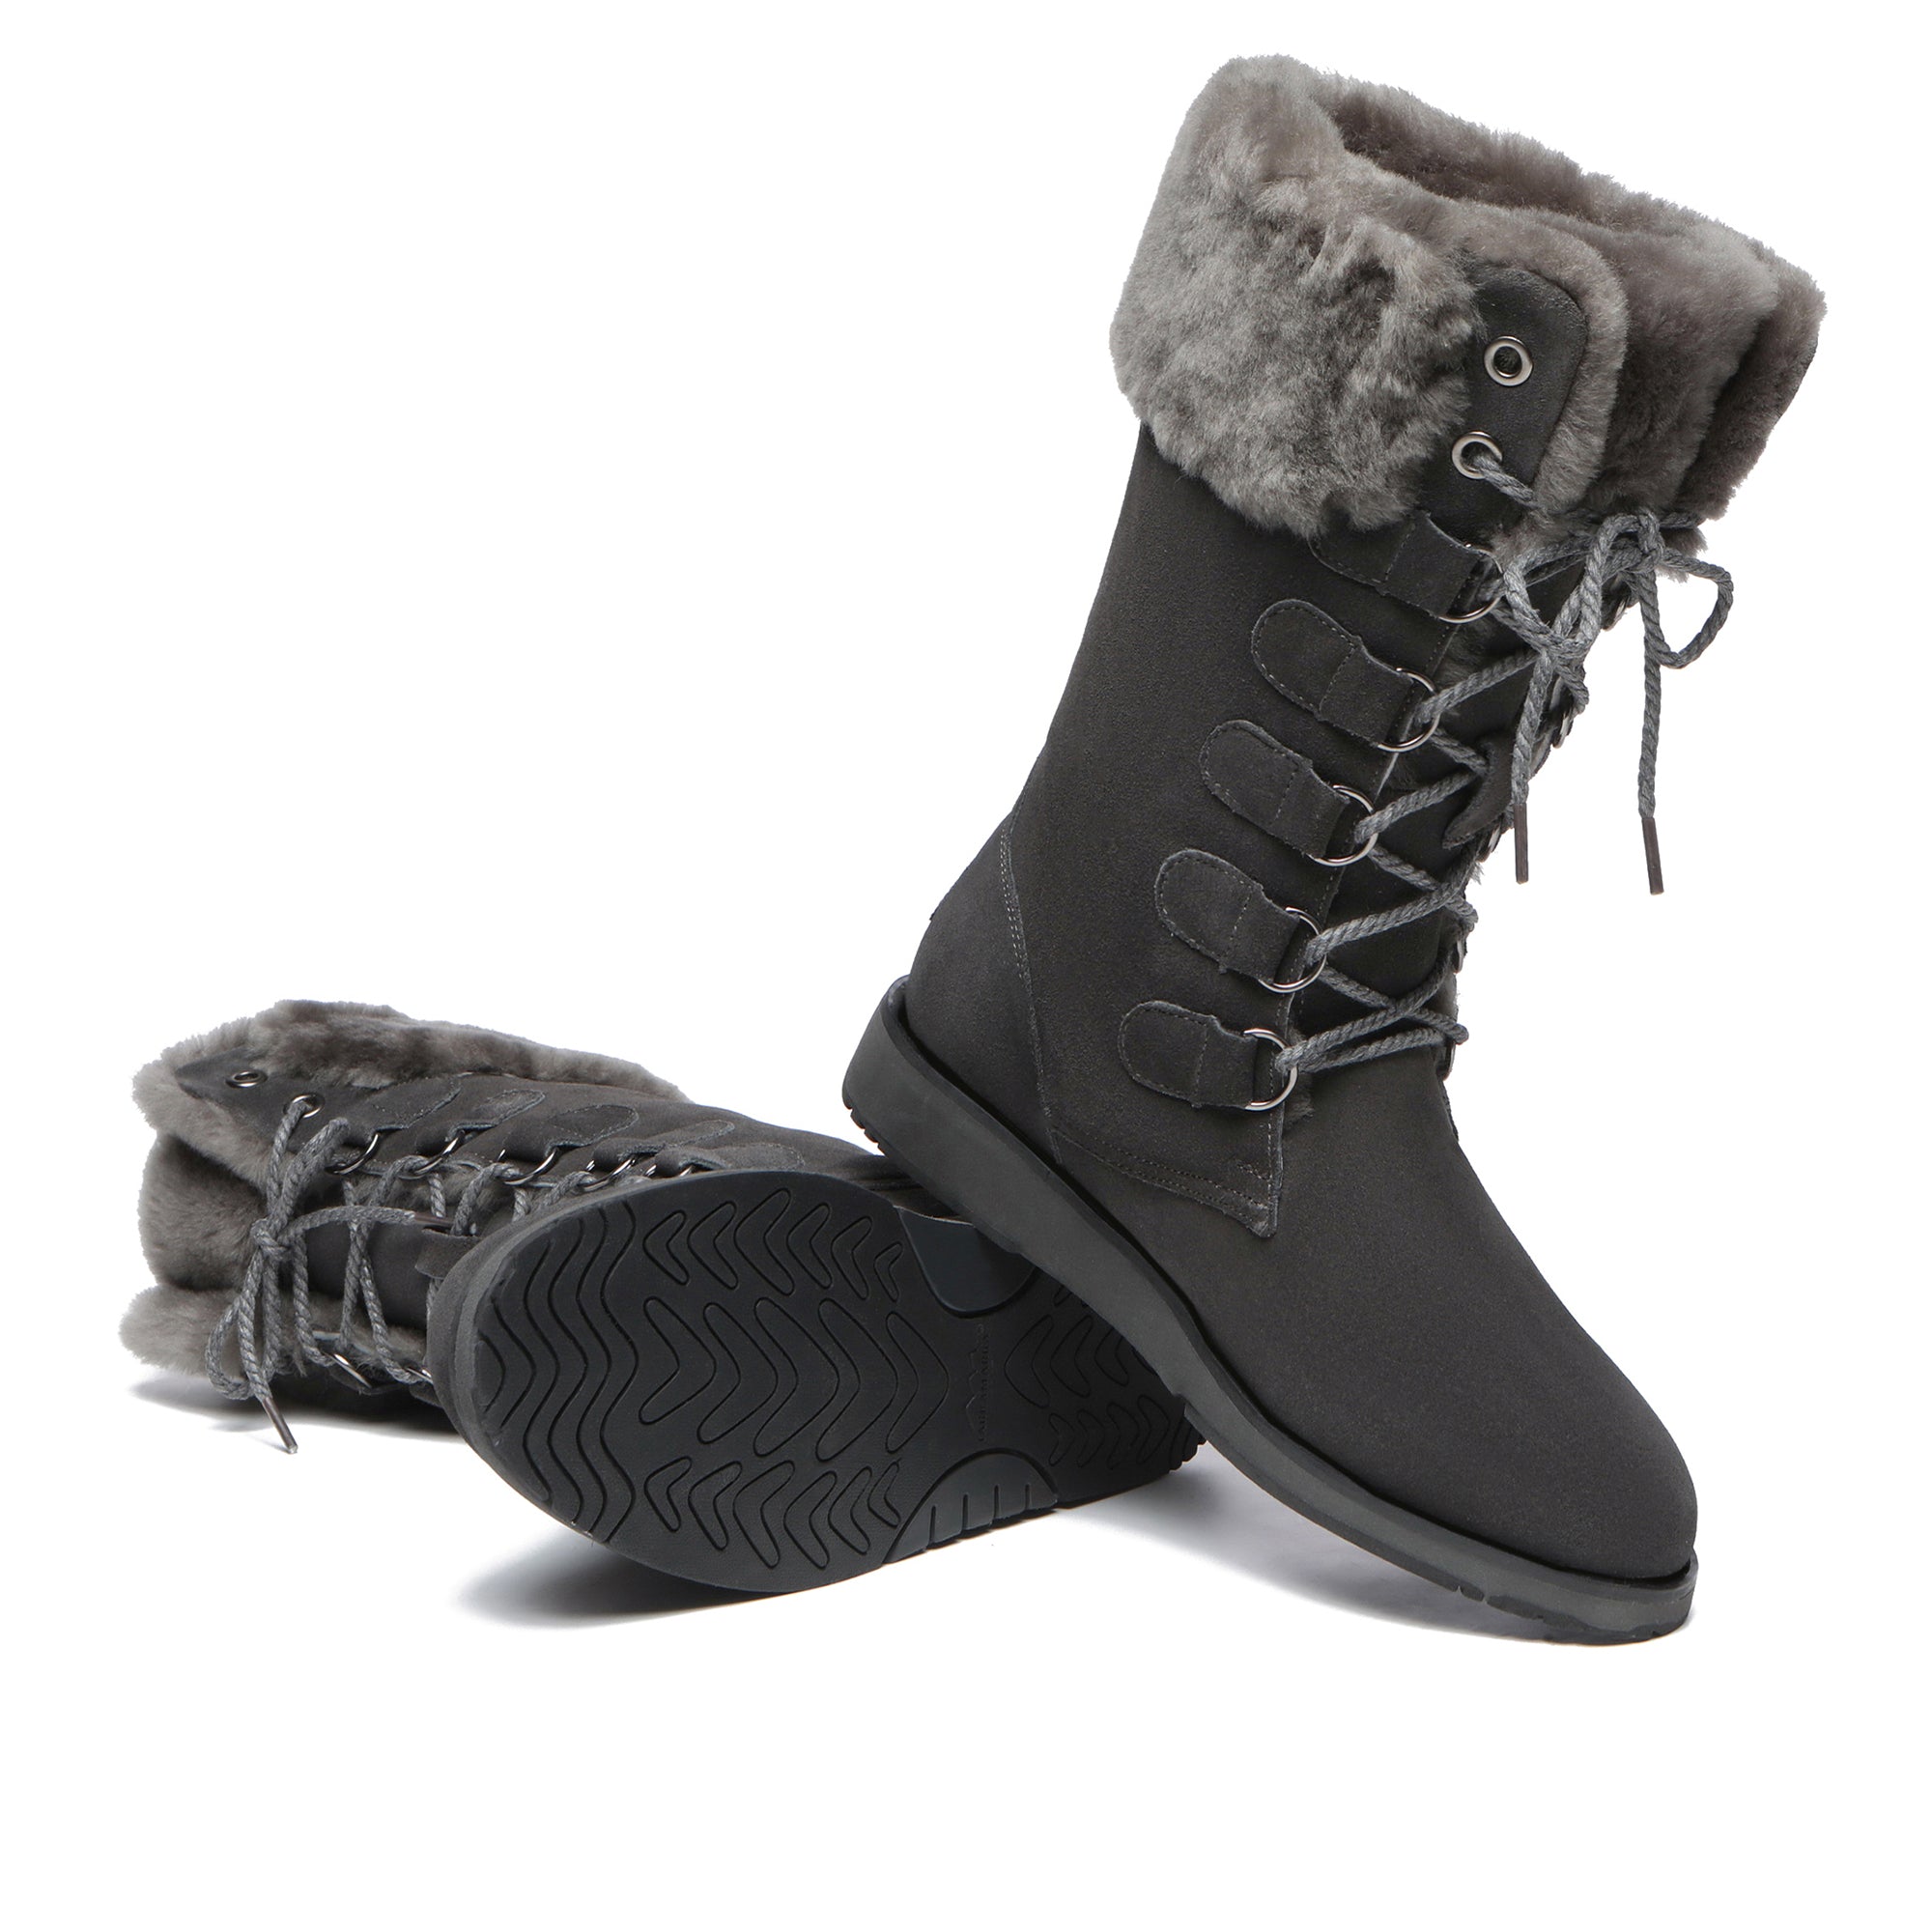 Beck Outback High Boots